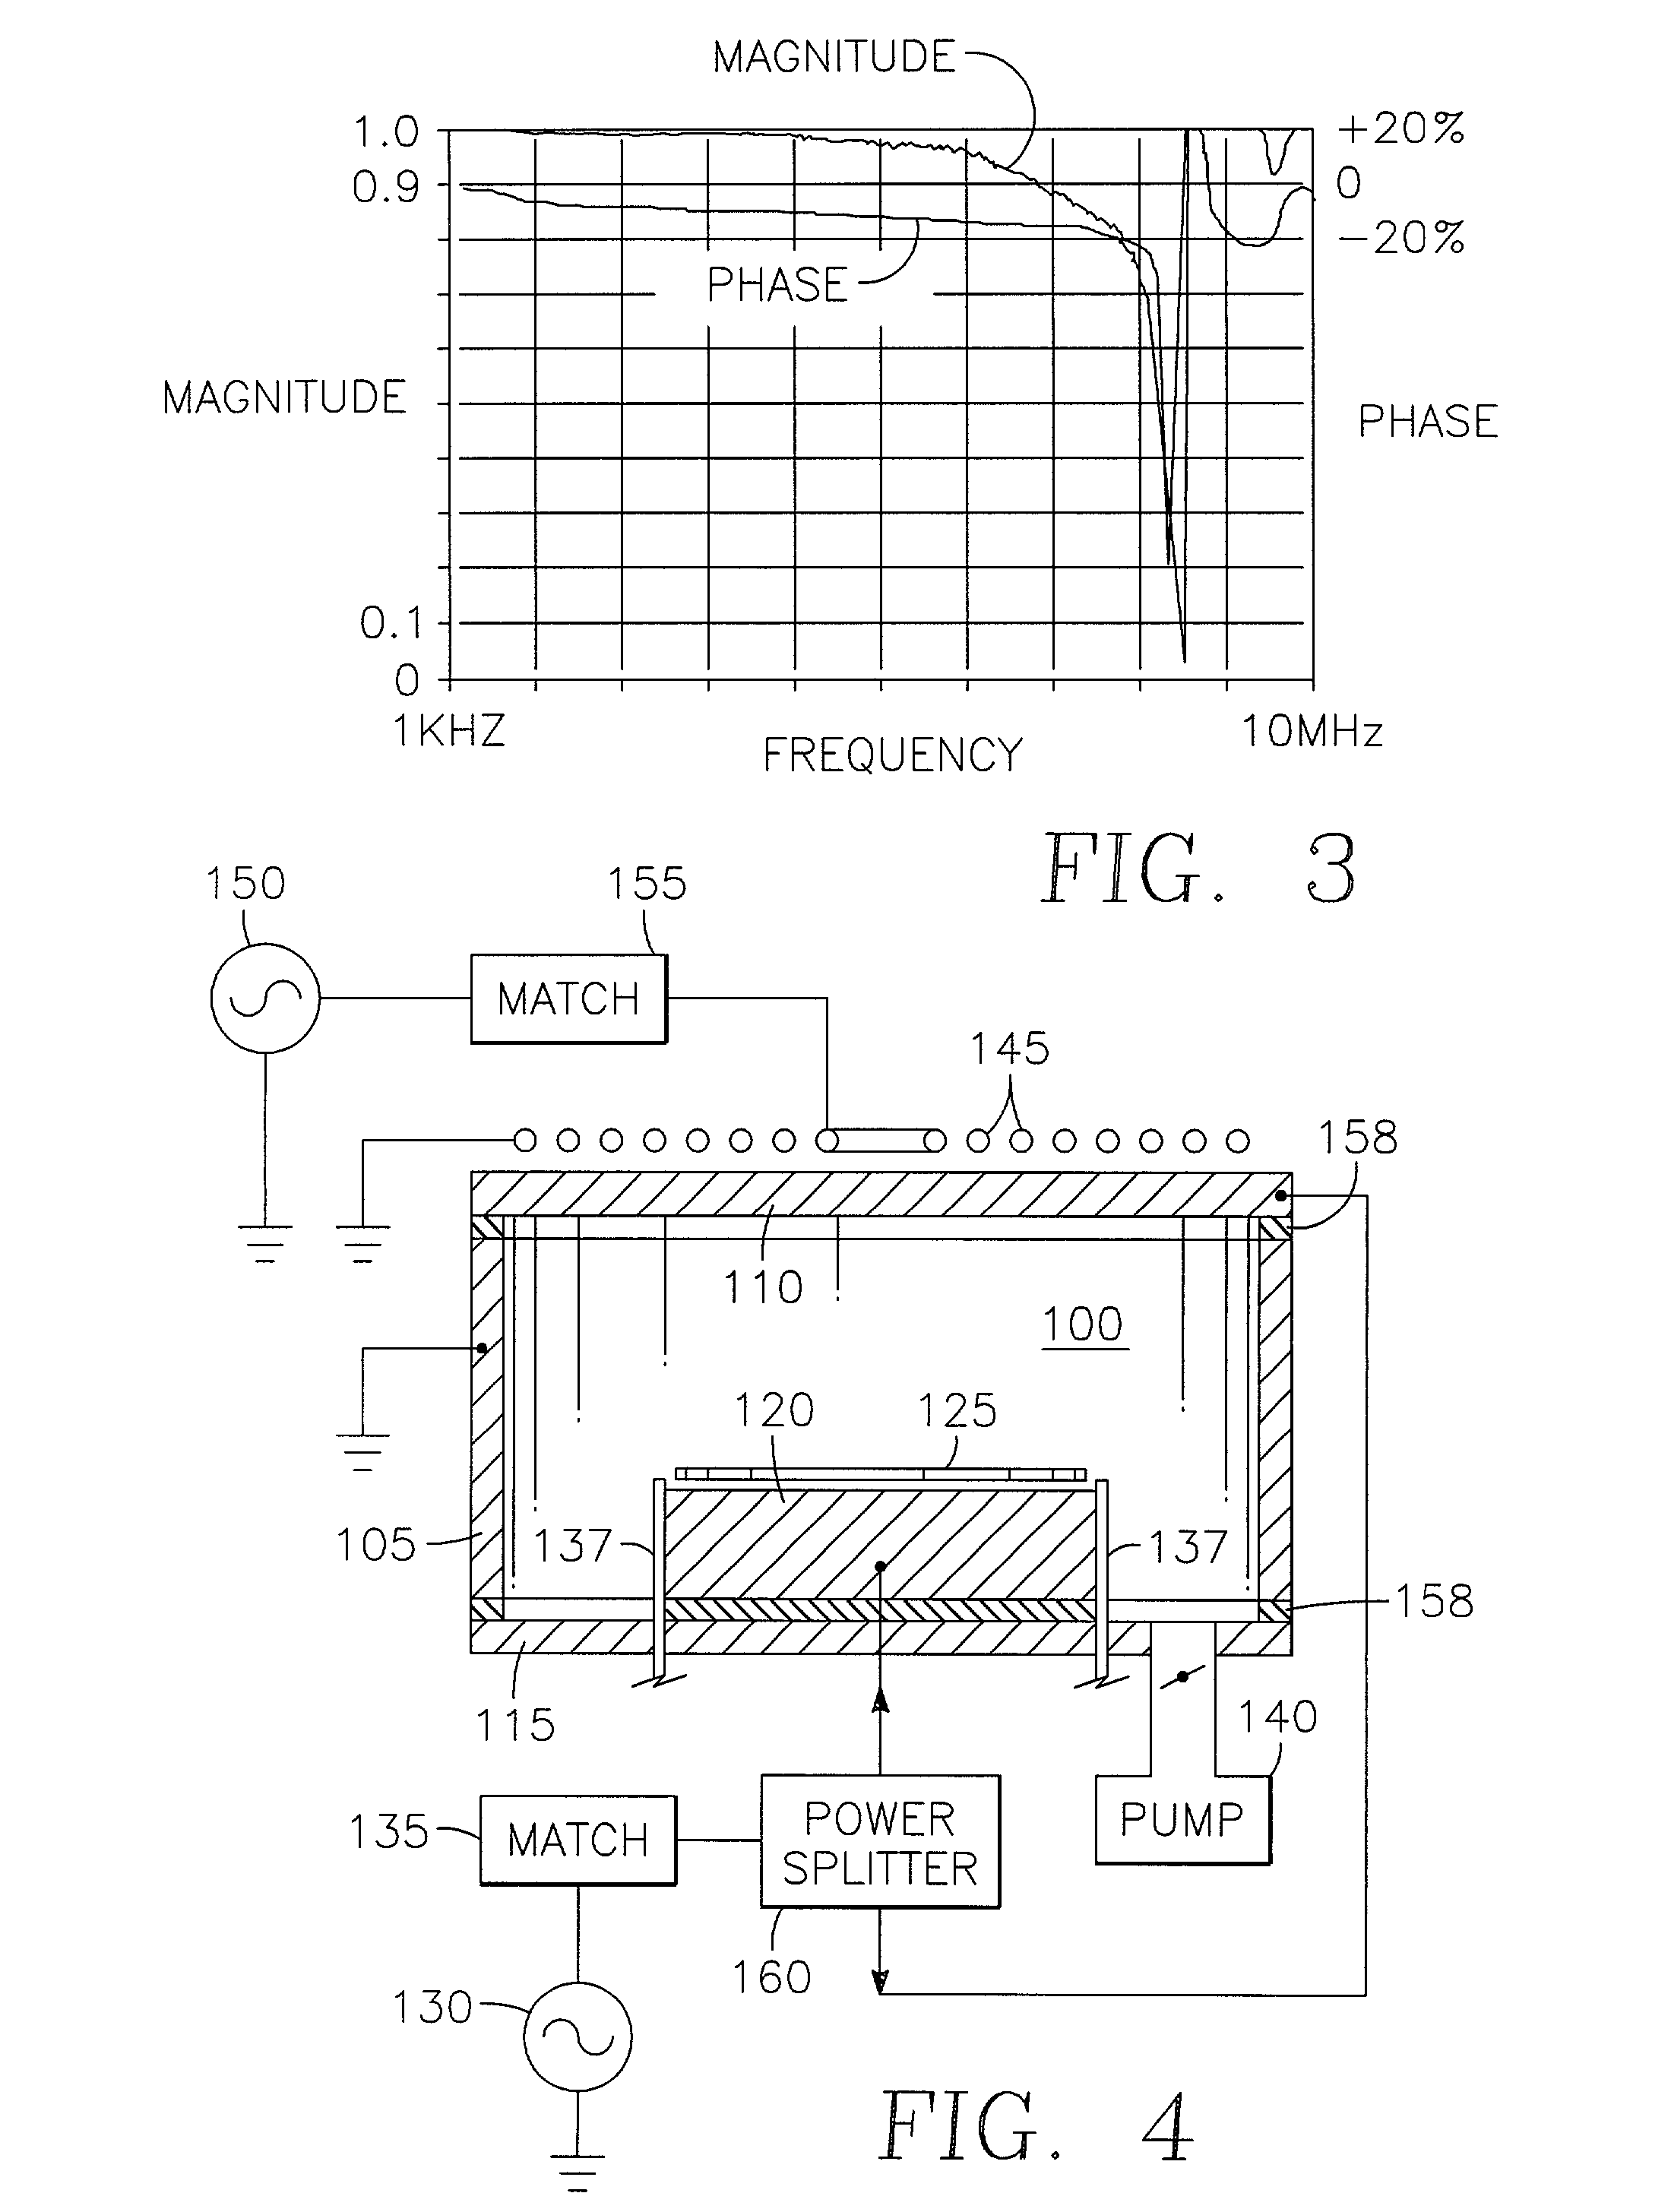 Parallel-plate electrode plasma reactor having an inductive antenna coupling power through a parallel plate electrode